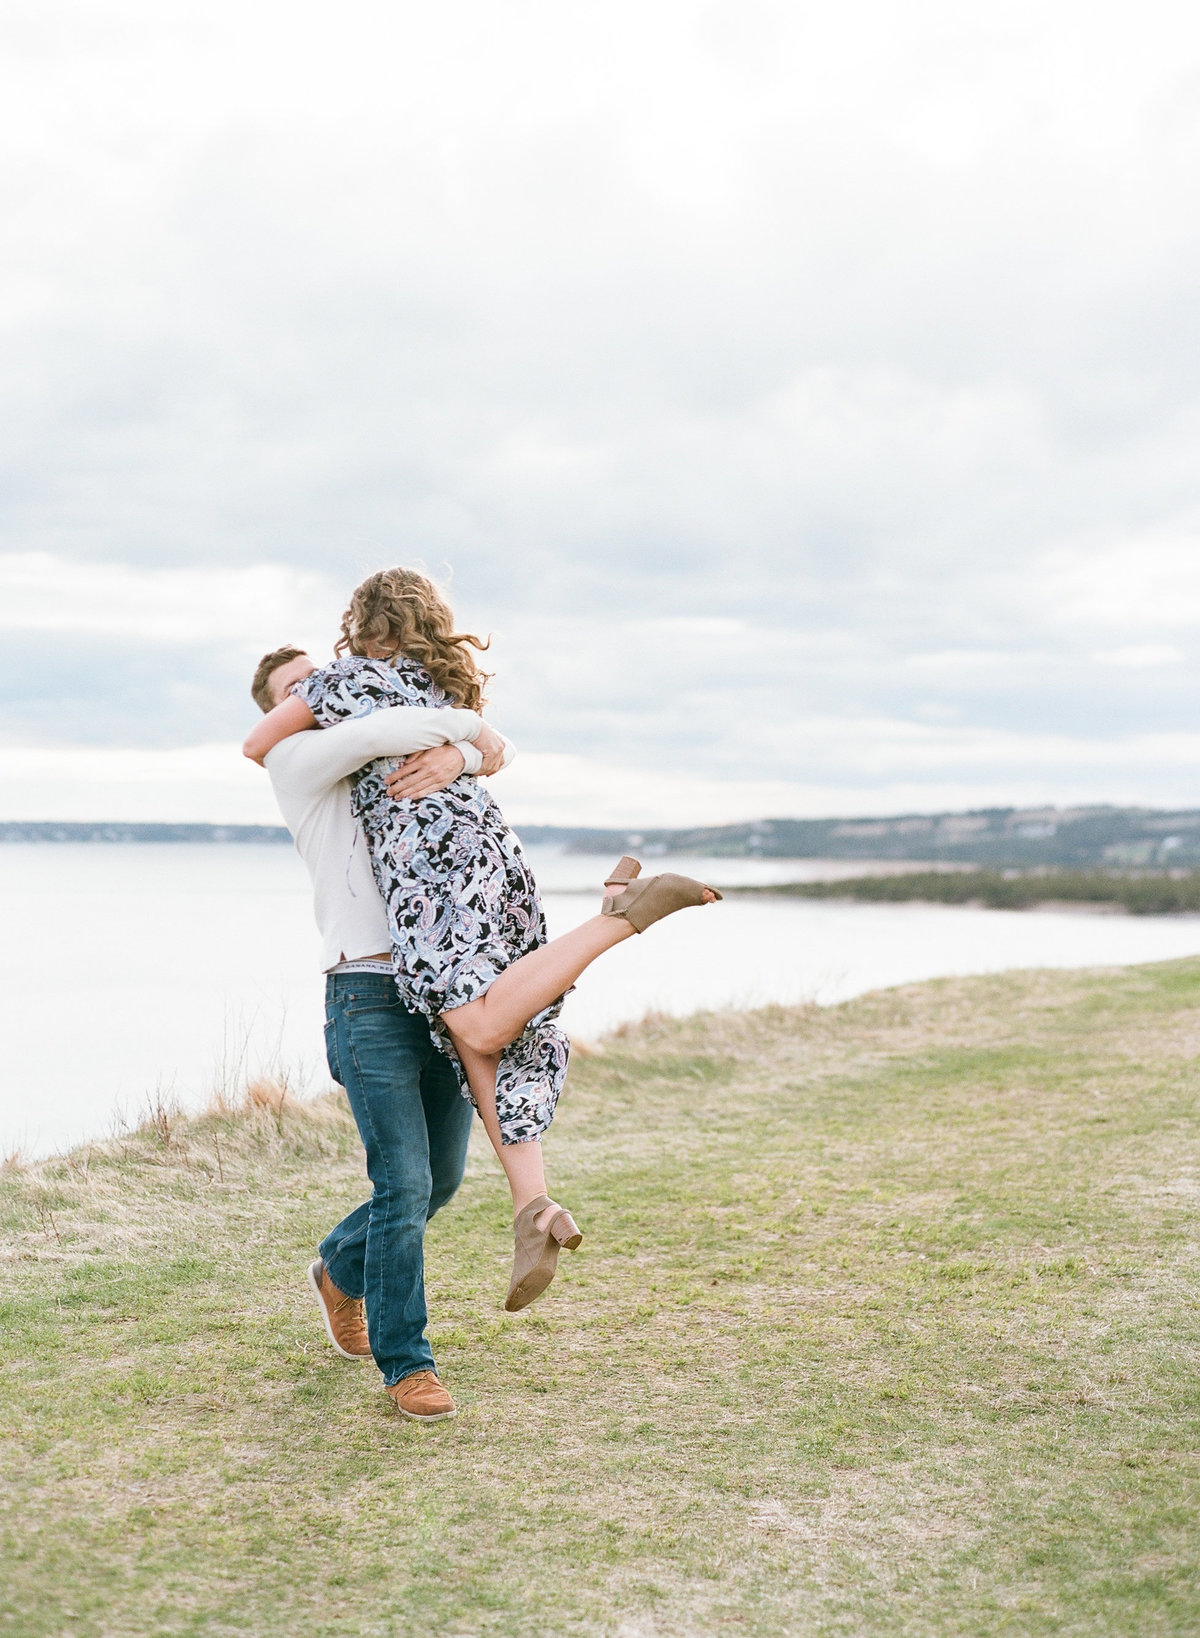 Jacqueline Anne Photography - Akayla and Andrew - Lawrencetown Beach-41